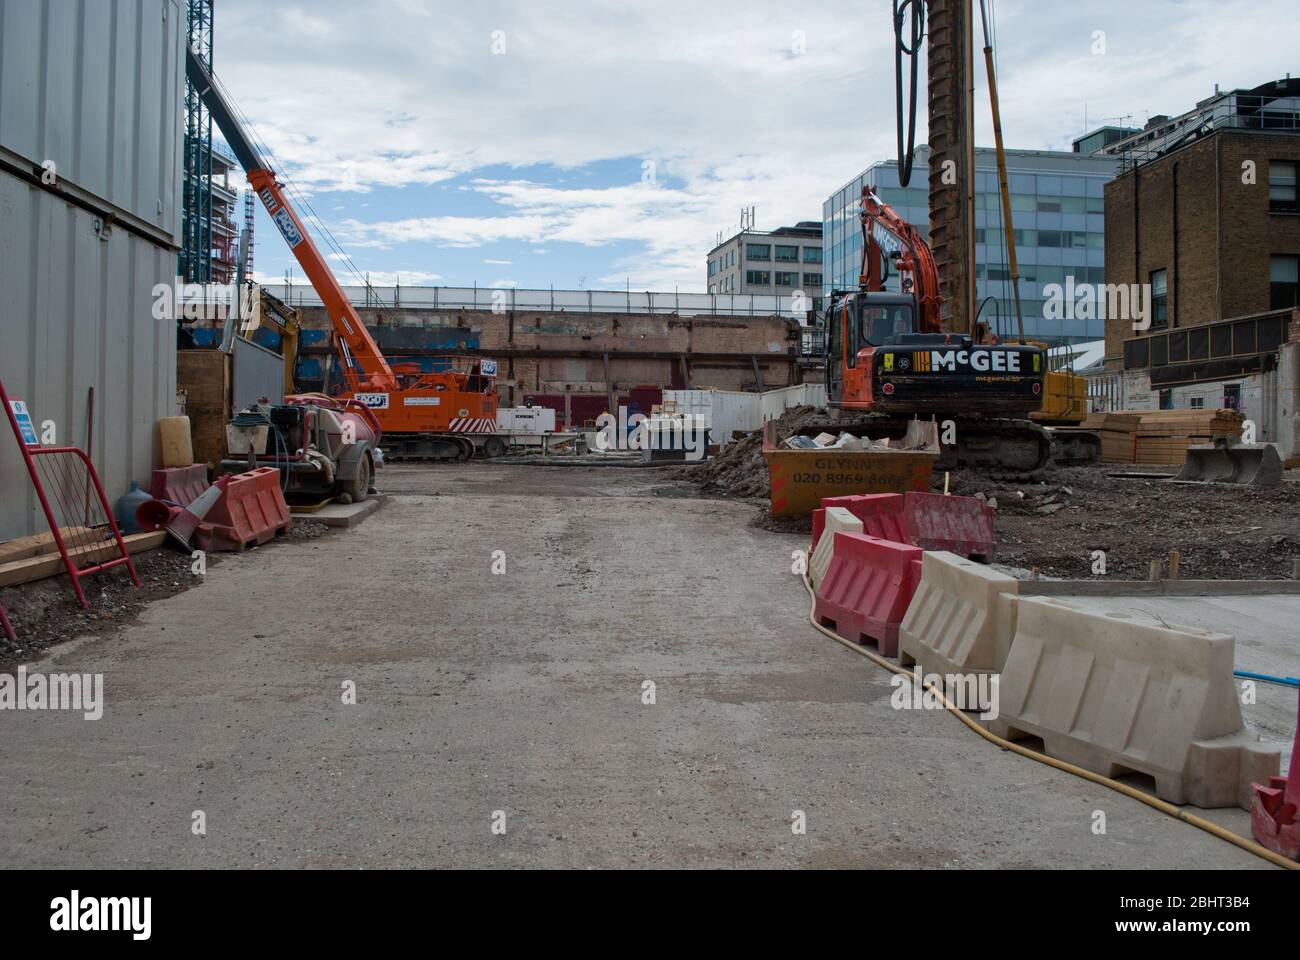 Construction site on the site of the Former Hammersmith Palais, 242 Shepherds Bush Road, London, W6 Stock Photo